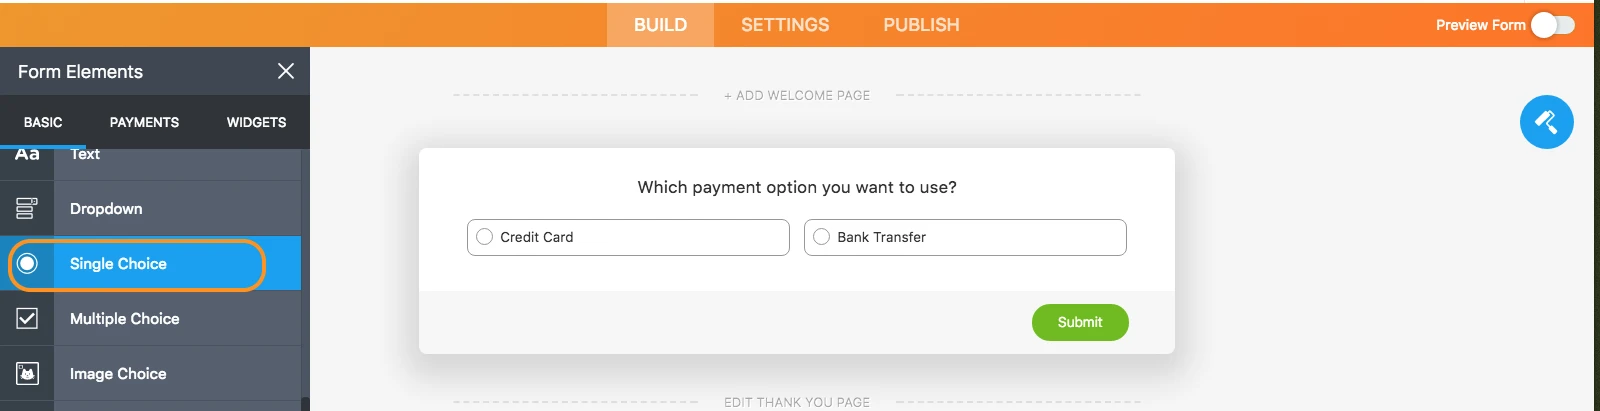 if I do not have a credit card how I could end the registration form ? Image 1 Screenshot 60